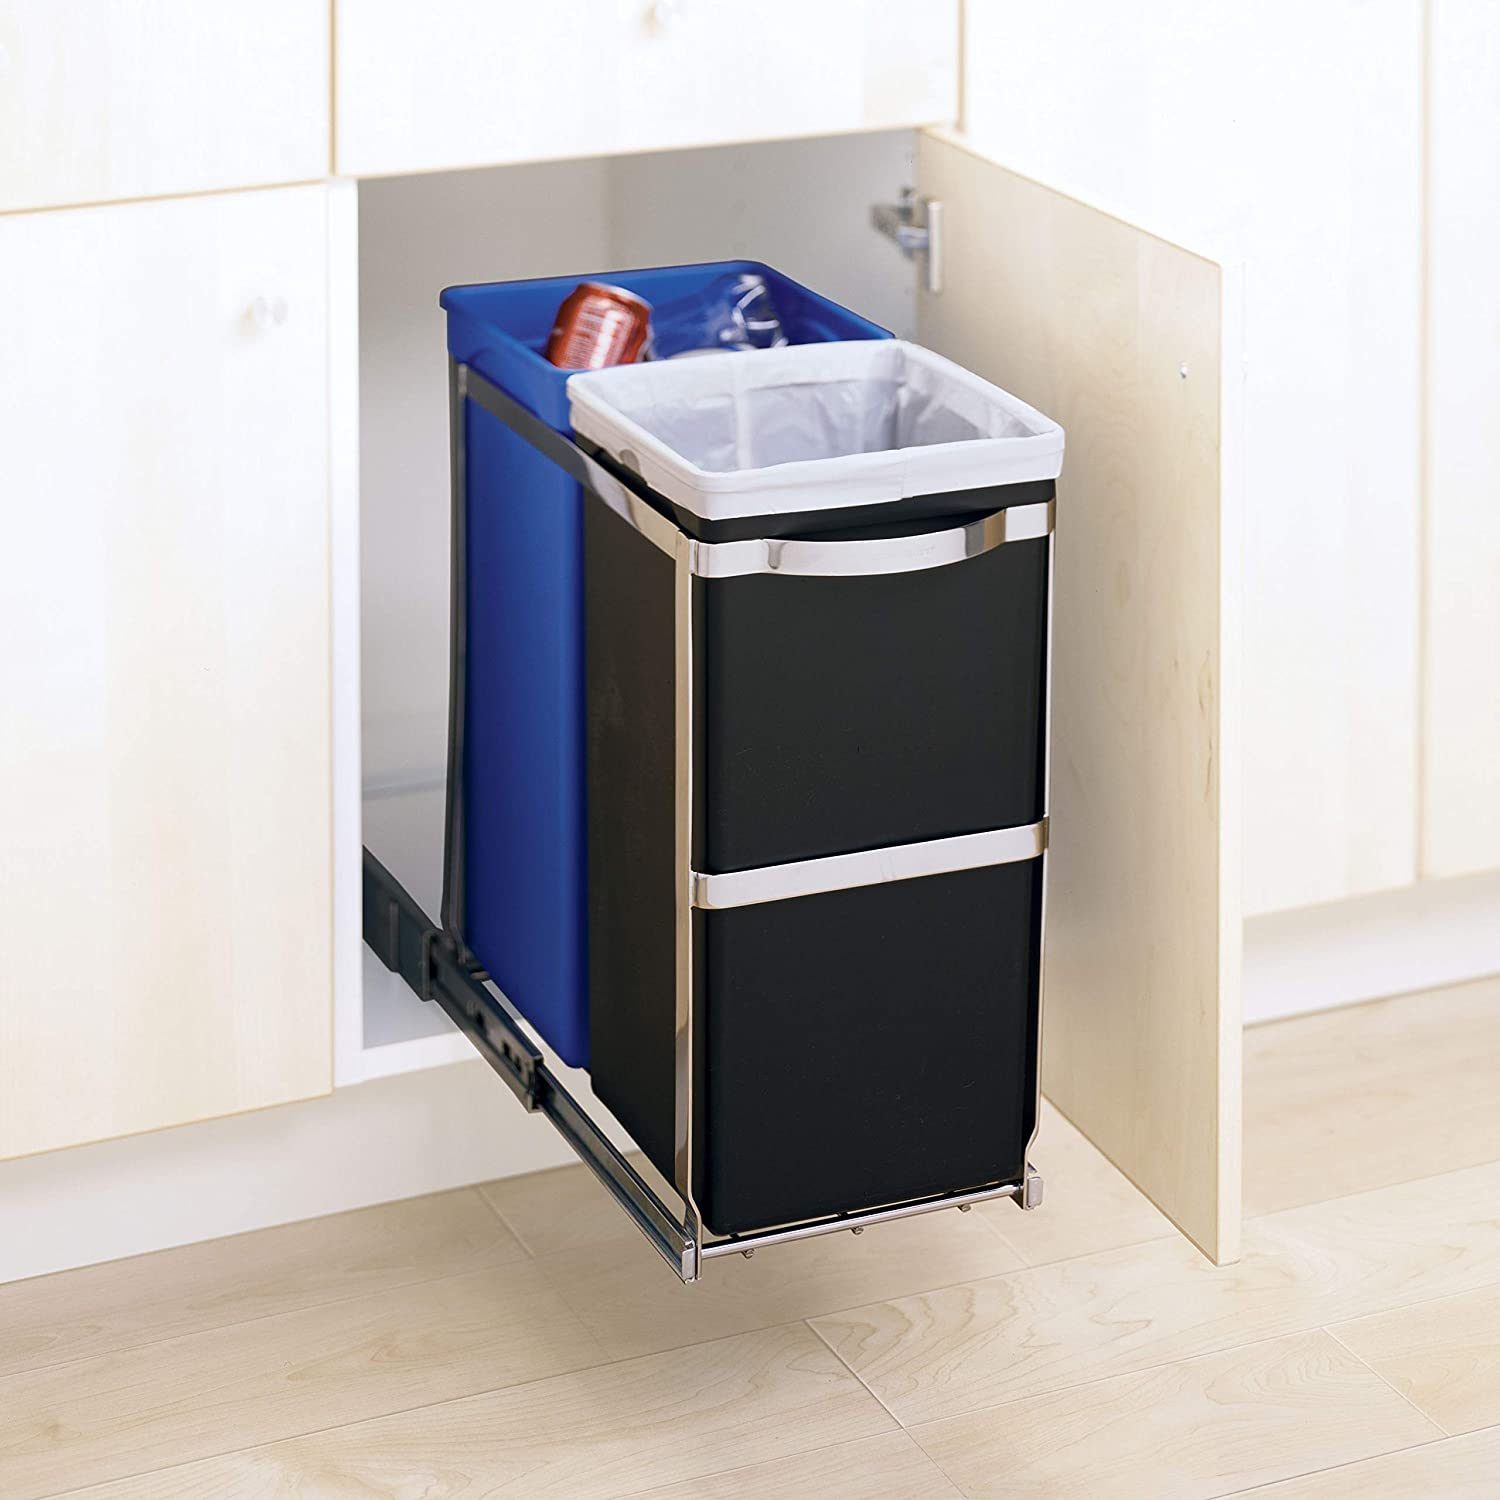 https://www.tasteofhome.com/wp-content/uploads/1969/12/simplehuman-35-liter-pull-out-recycling-and-trash-can-bin-ecomm-via-amazon.com_.jpg?fit=700%2C700